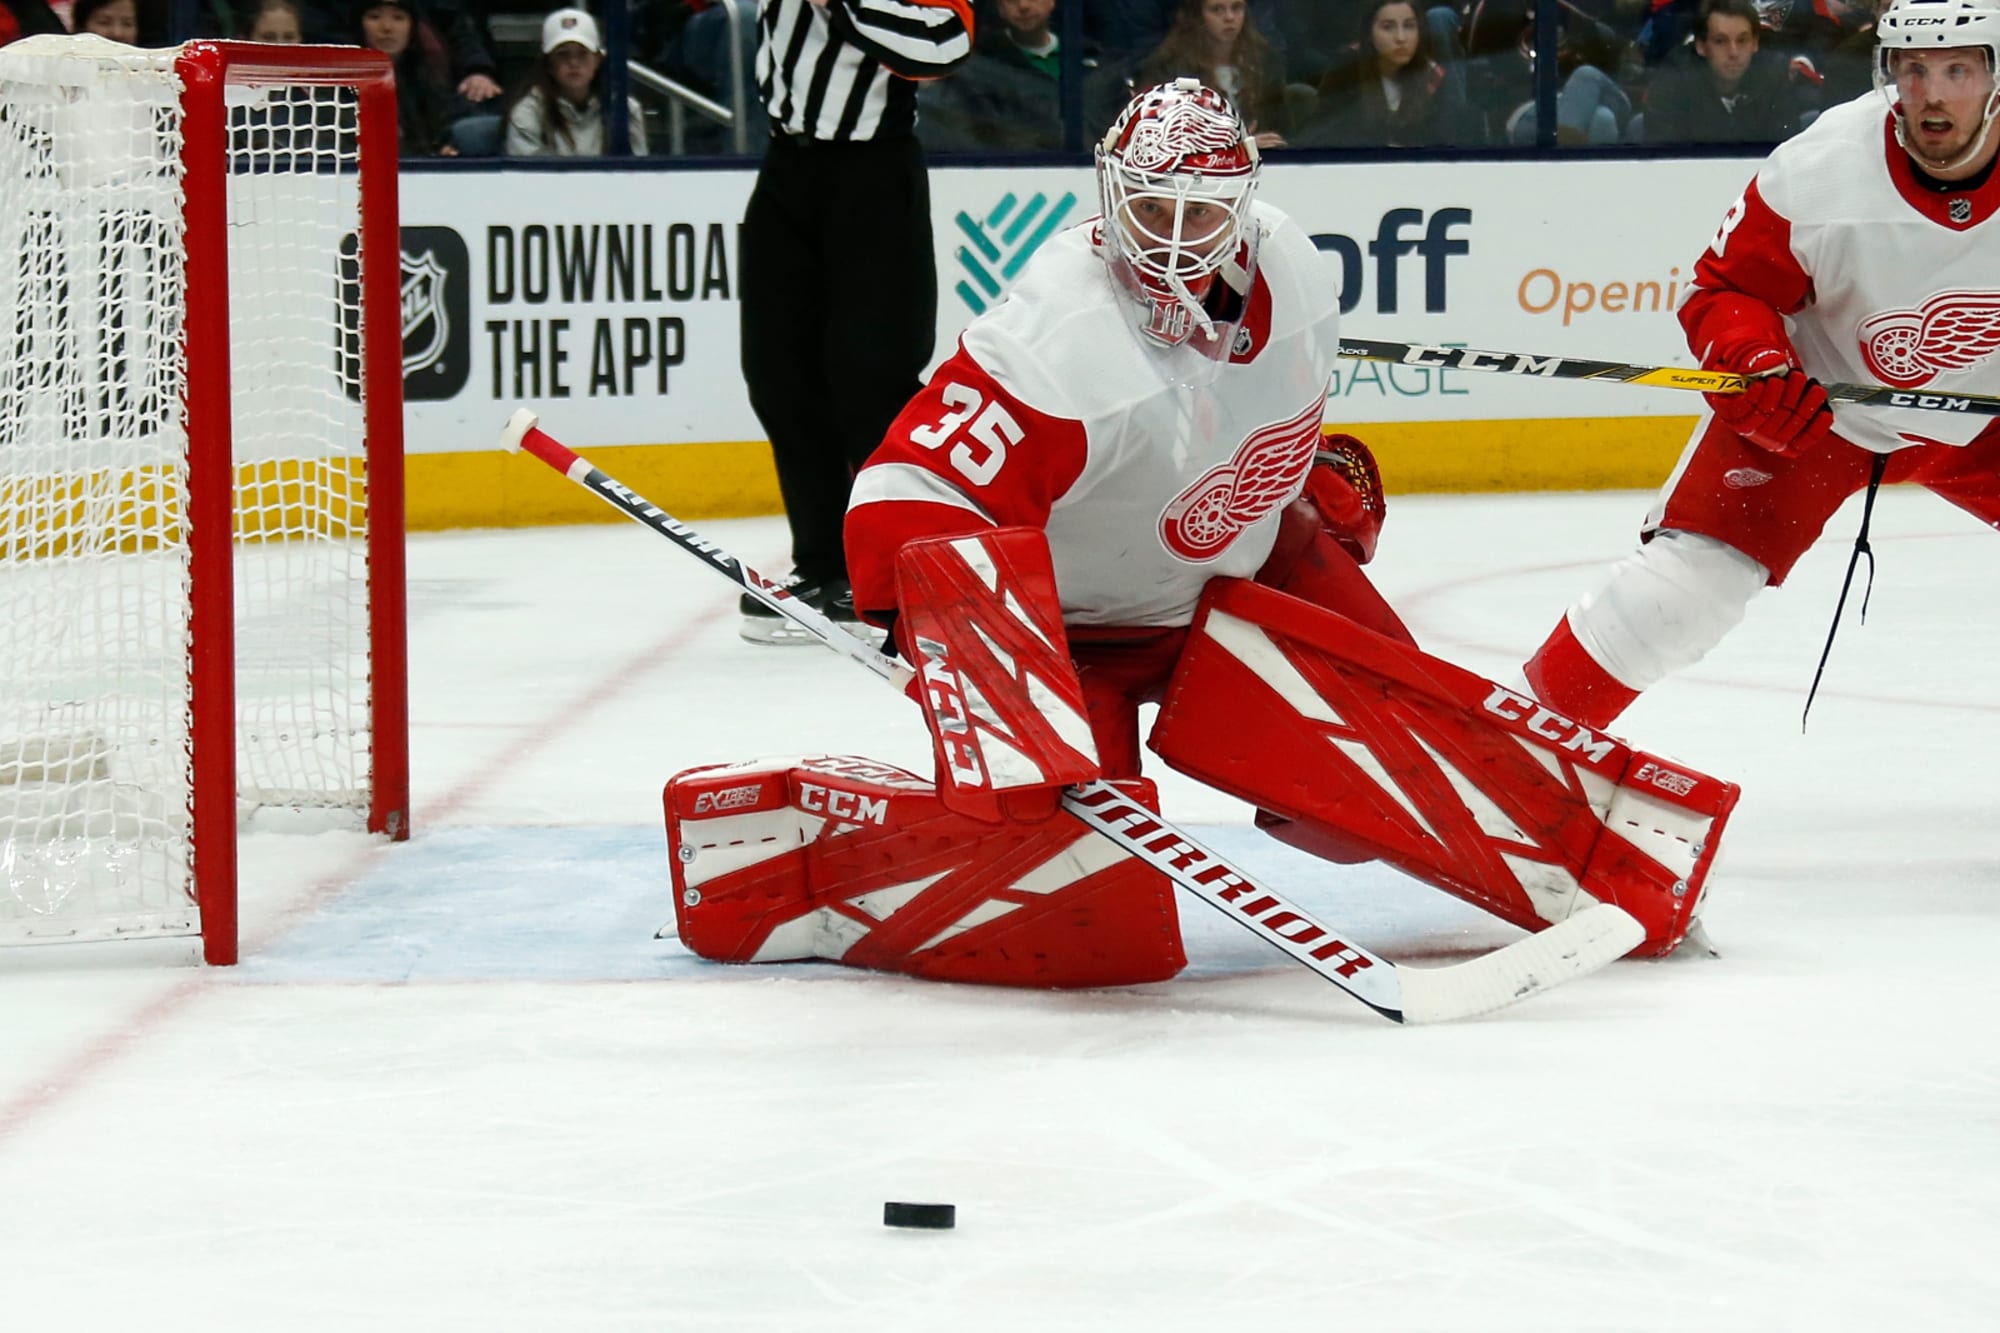 Jimmy Howard will represent the Detroit Red Wings in San Jose